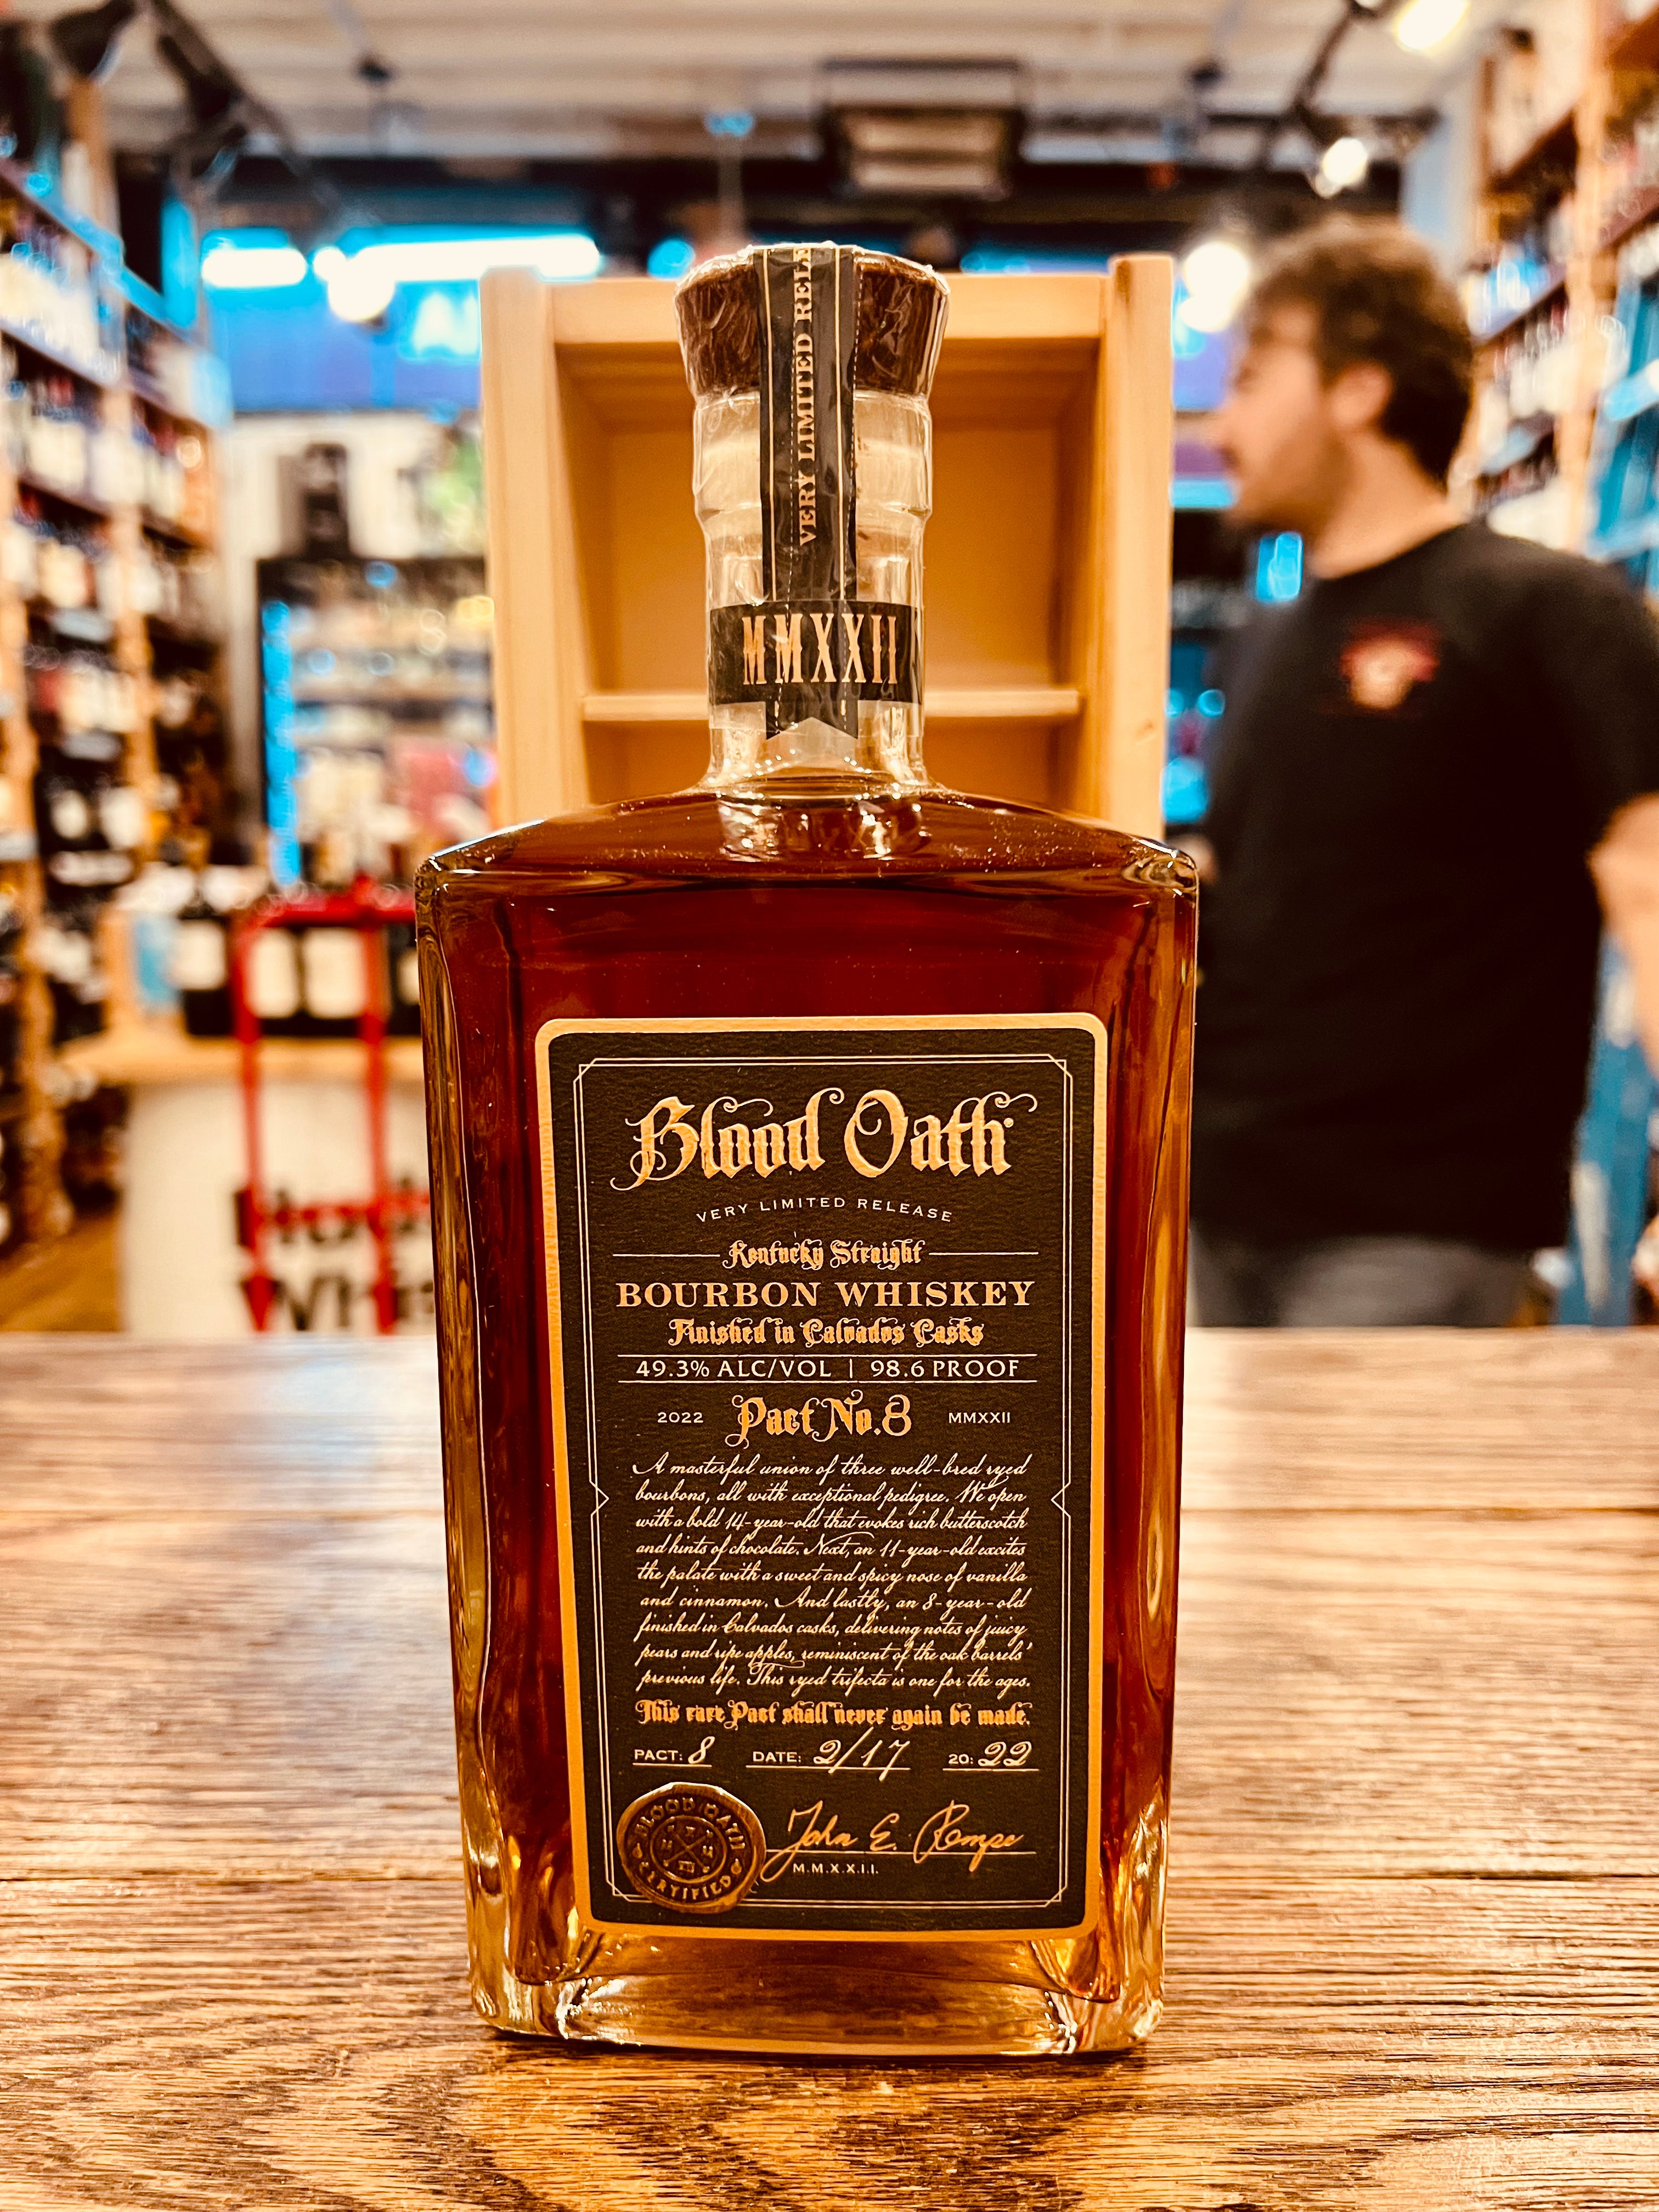 Blood Oath Bourbon Whiskey Pact No 8 750mL a square clear bottle with a dark label and gold lettering